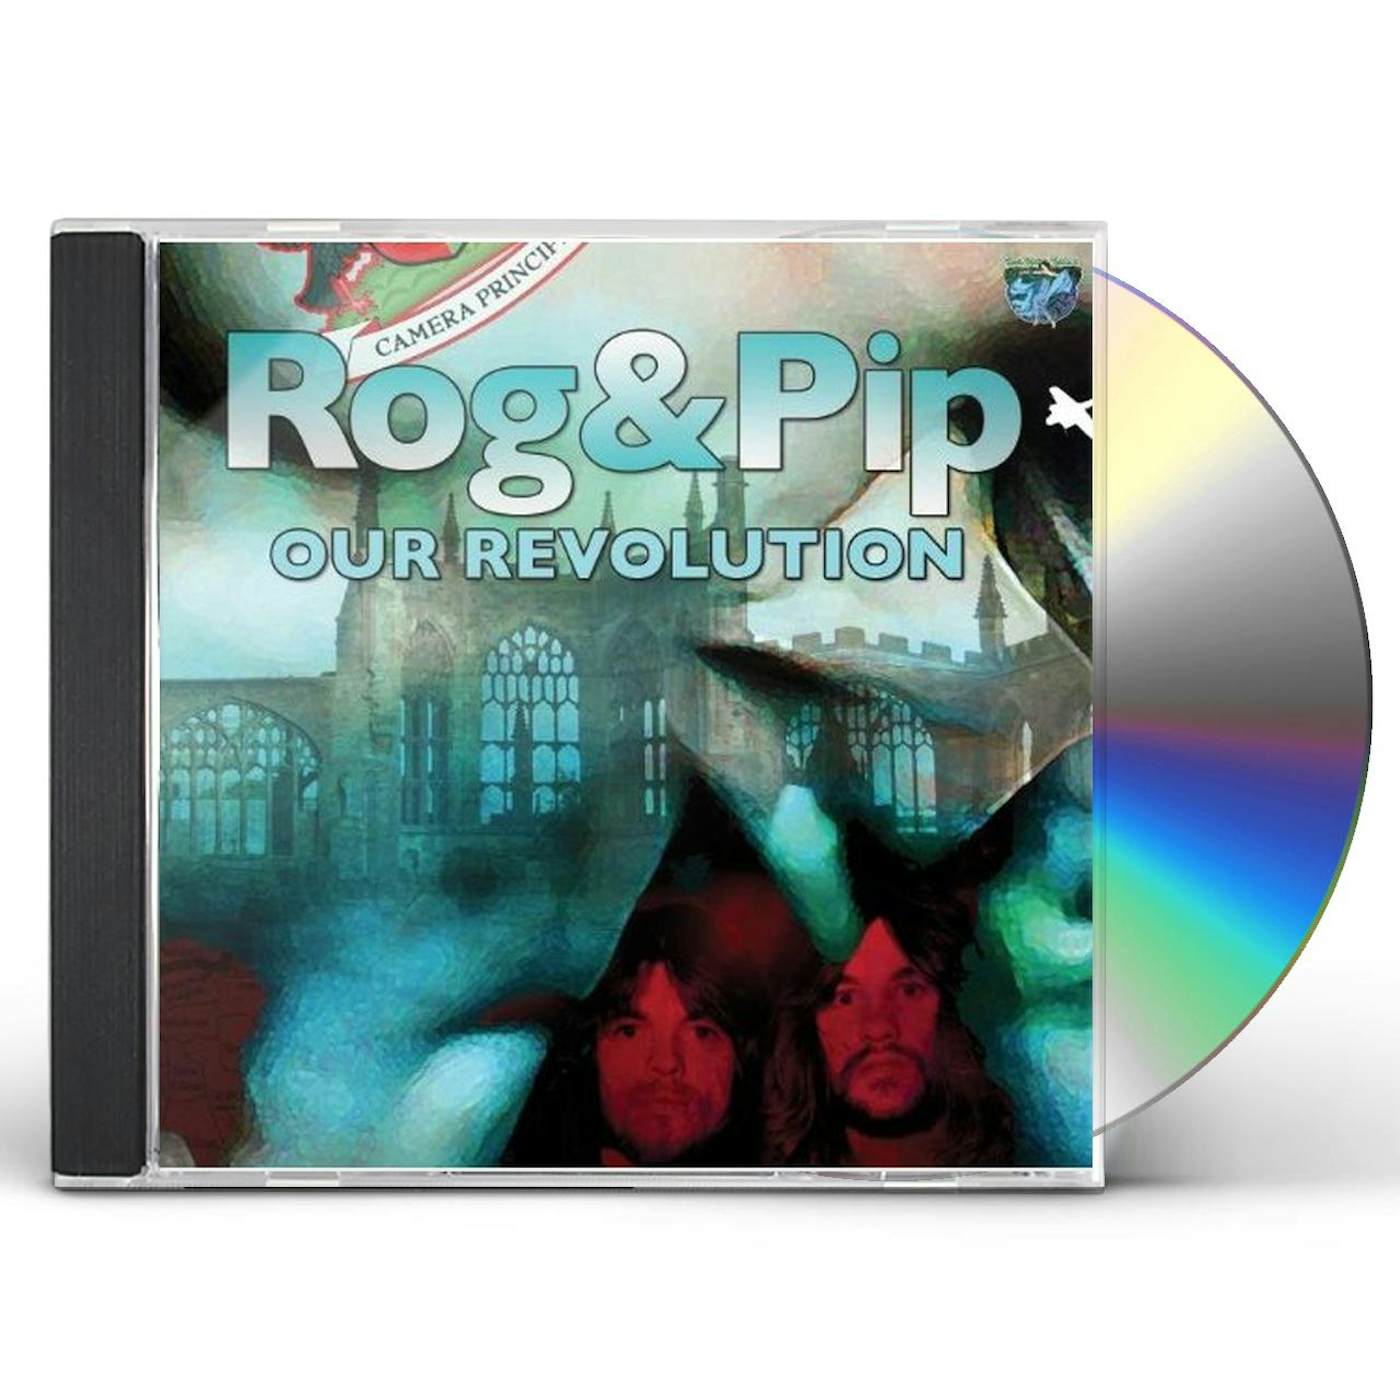 ROG AND PIP OUR REVOLUTION CD